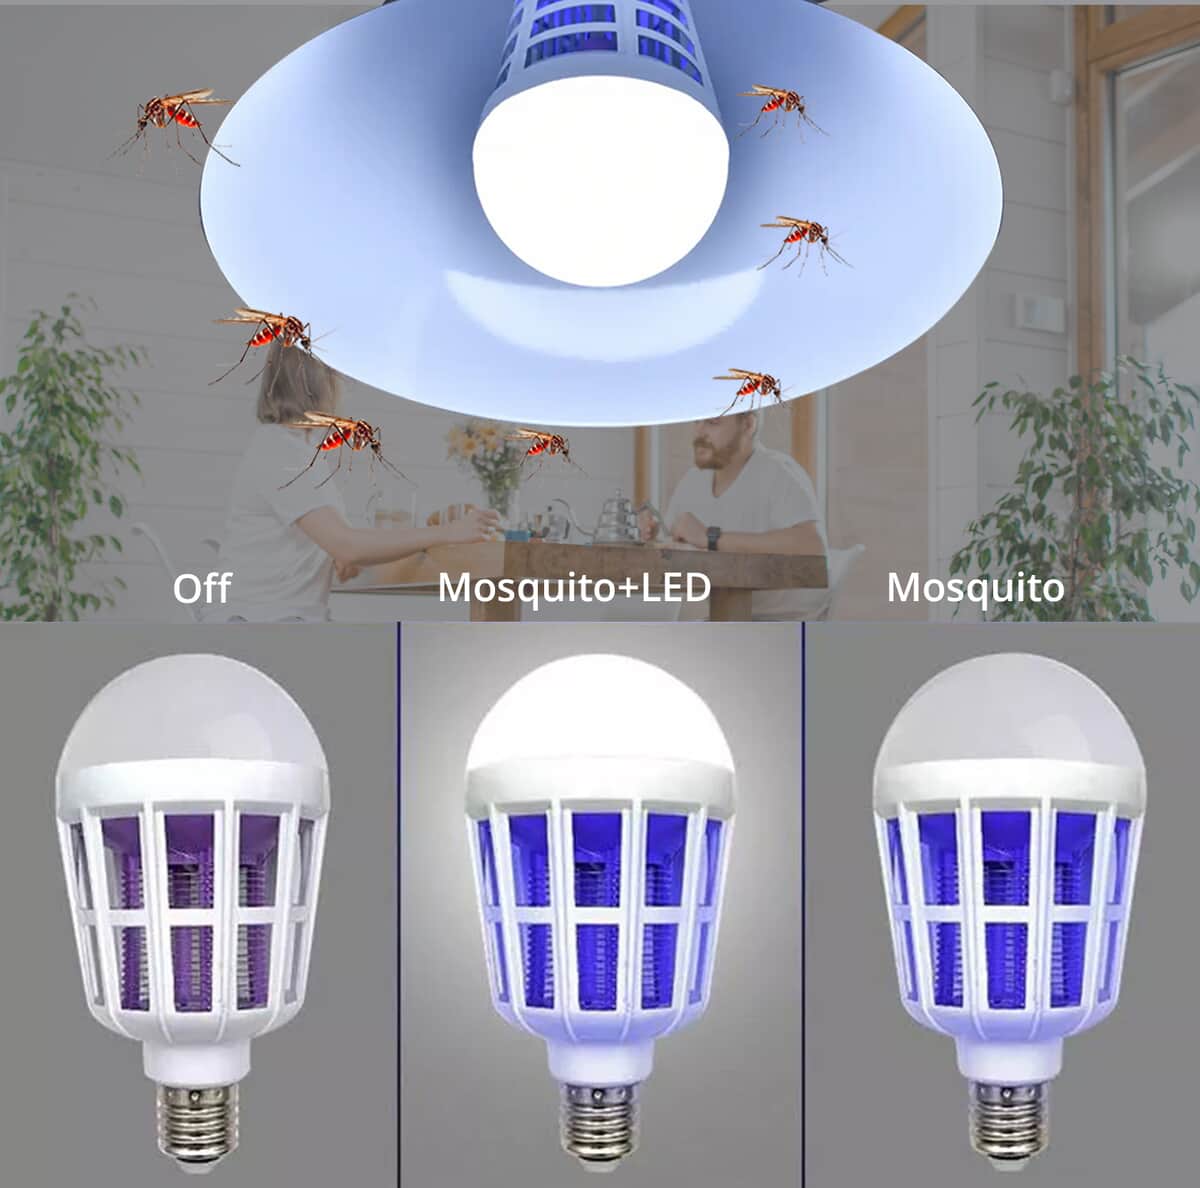 Homesmart Set of Two 2-in-1 LED and Mosquito Killing Bulb (15W, Lumen - 1200, Base -E27) image number 5